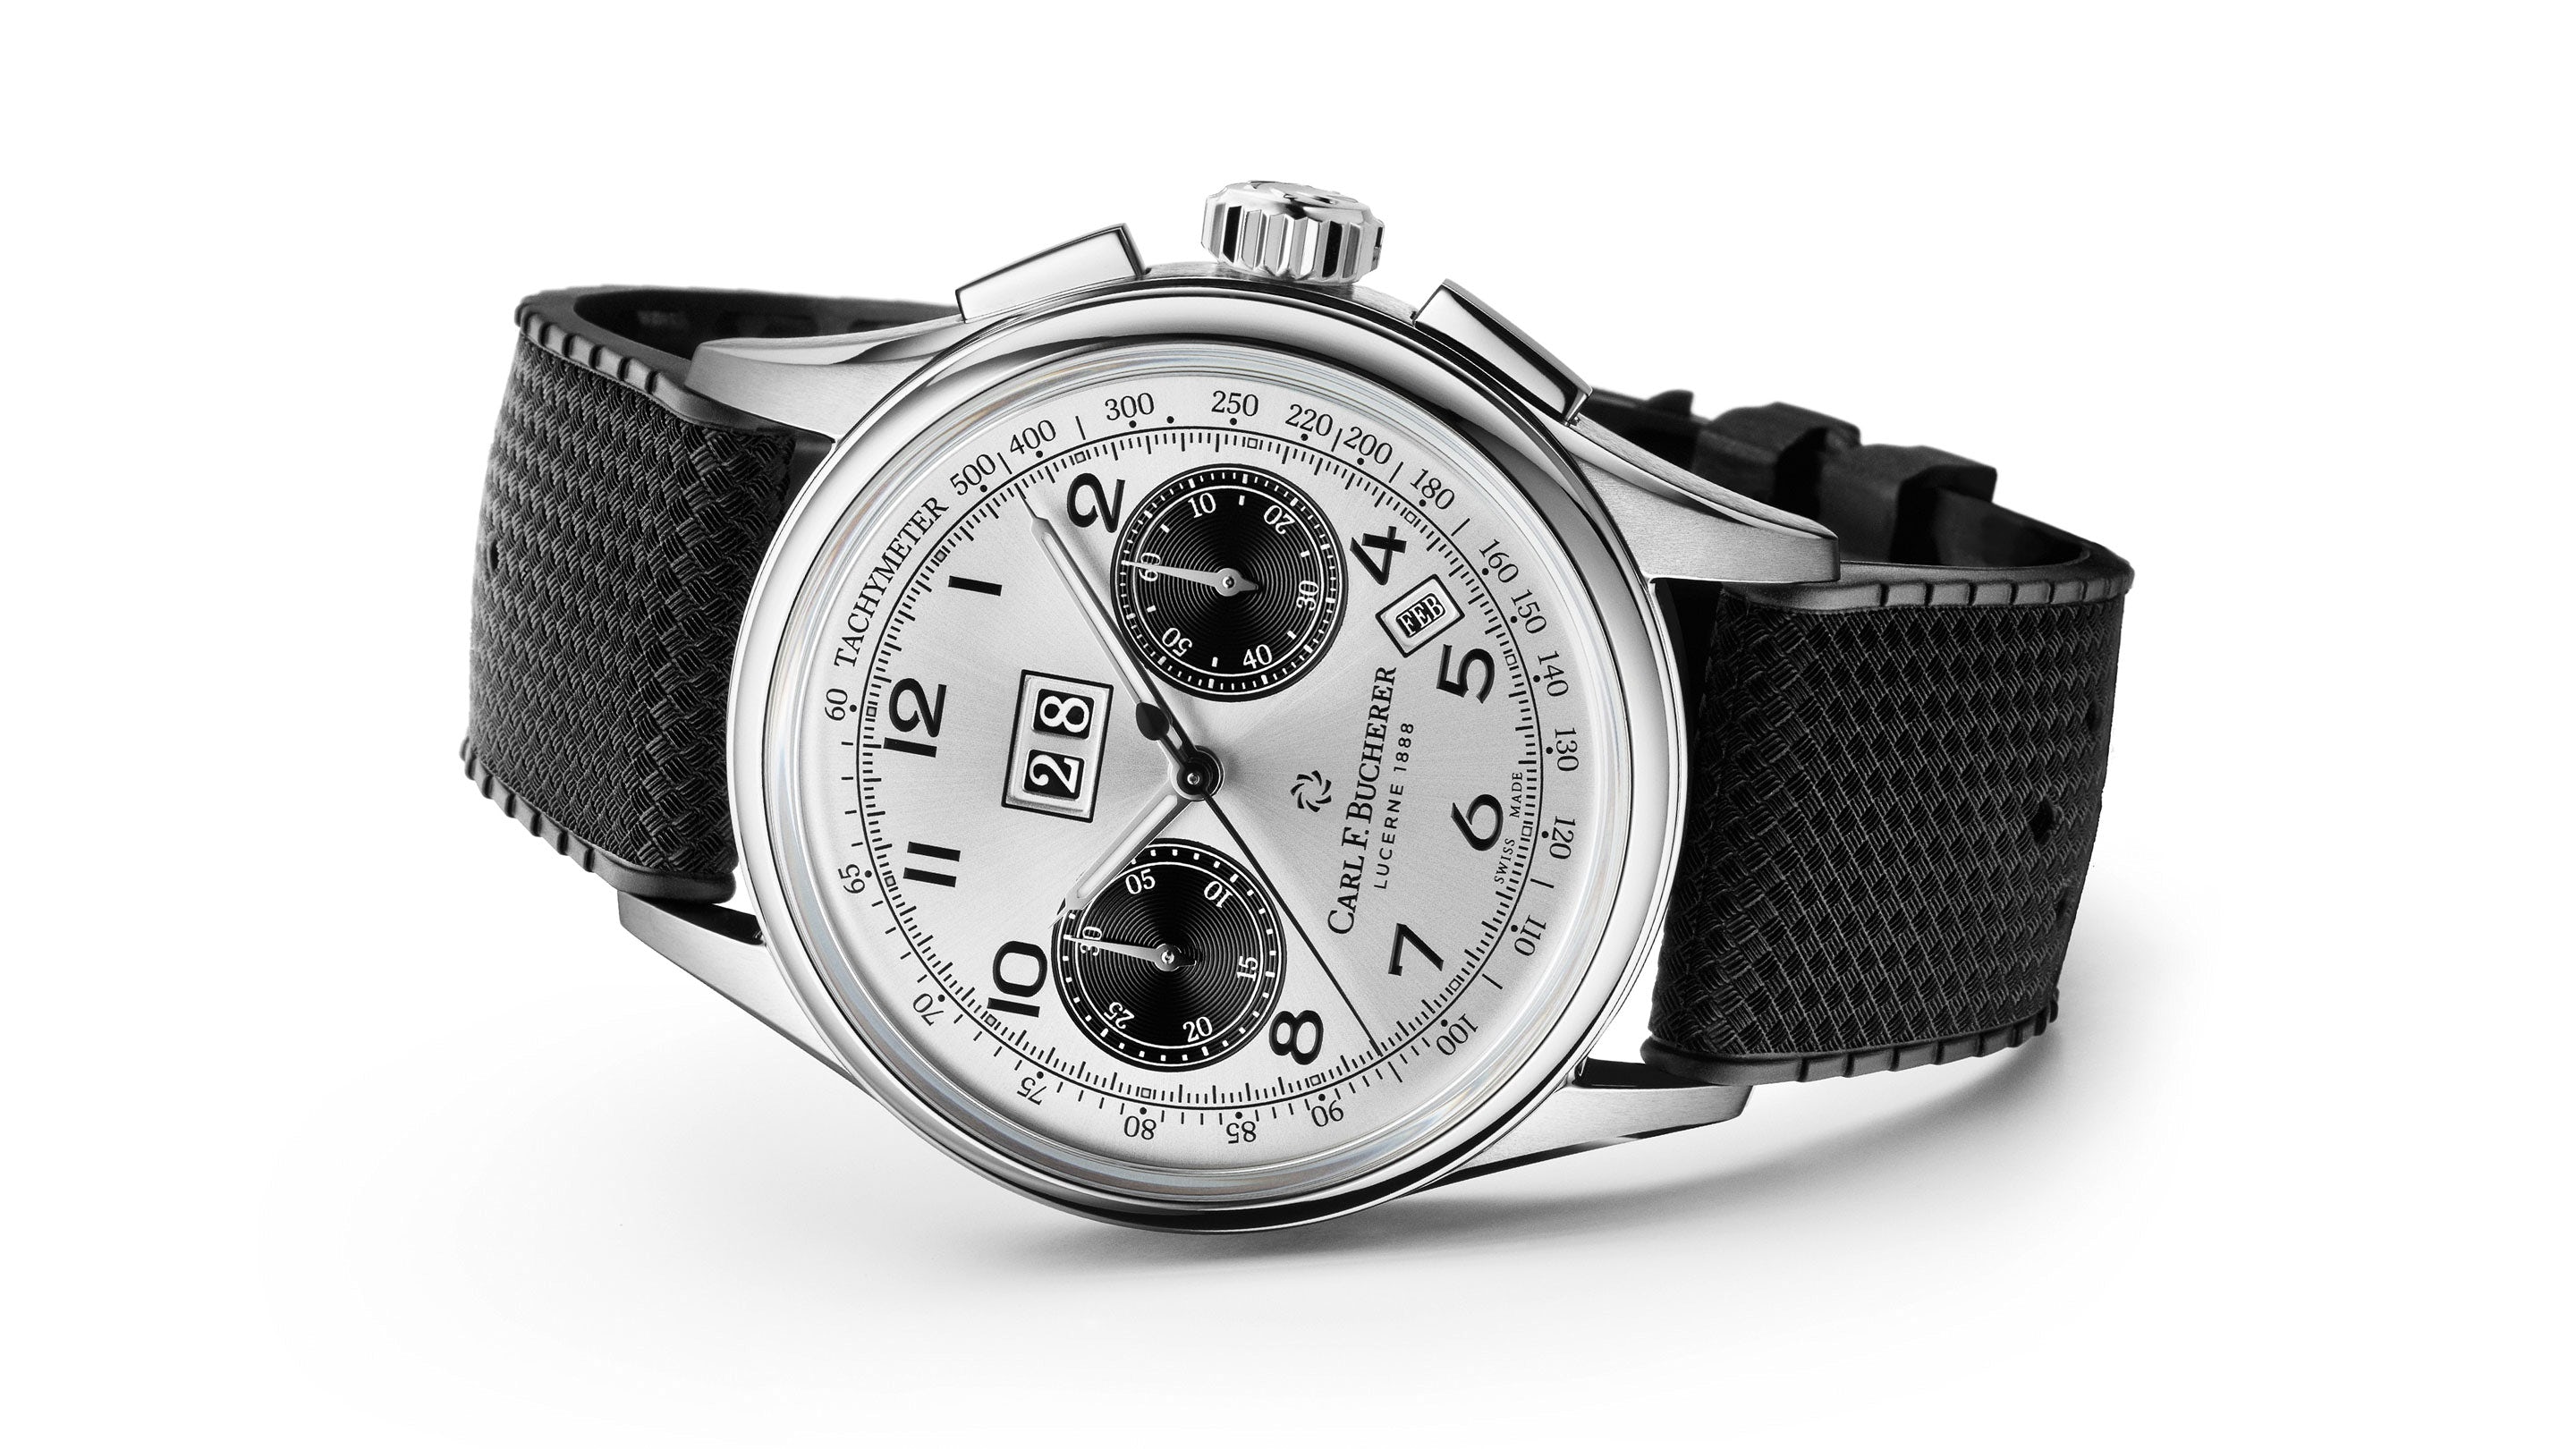 Carl F. Bucherer Heritage BiCompax Annual Calendar as unveiled at Baselworld 2019.